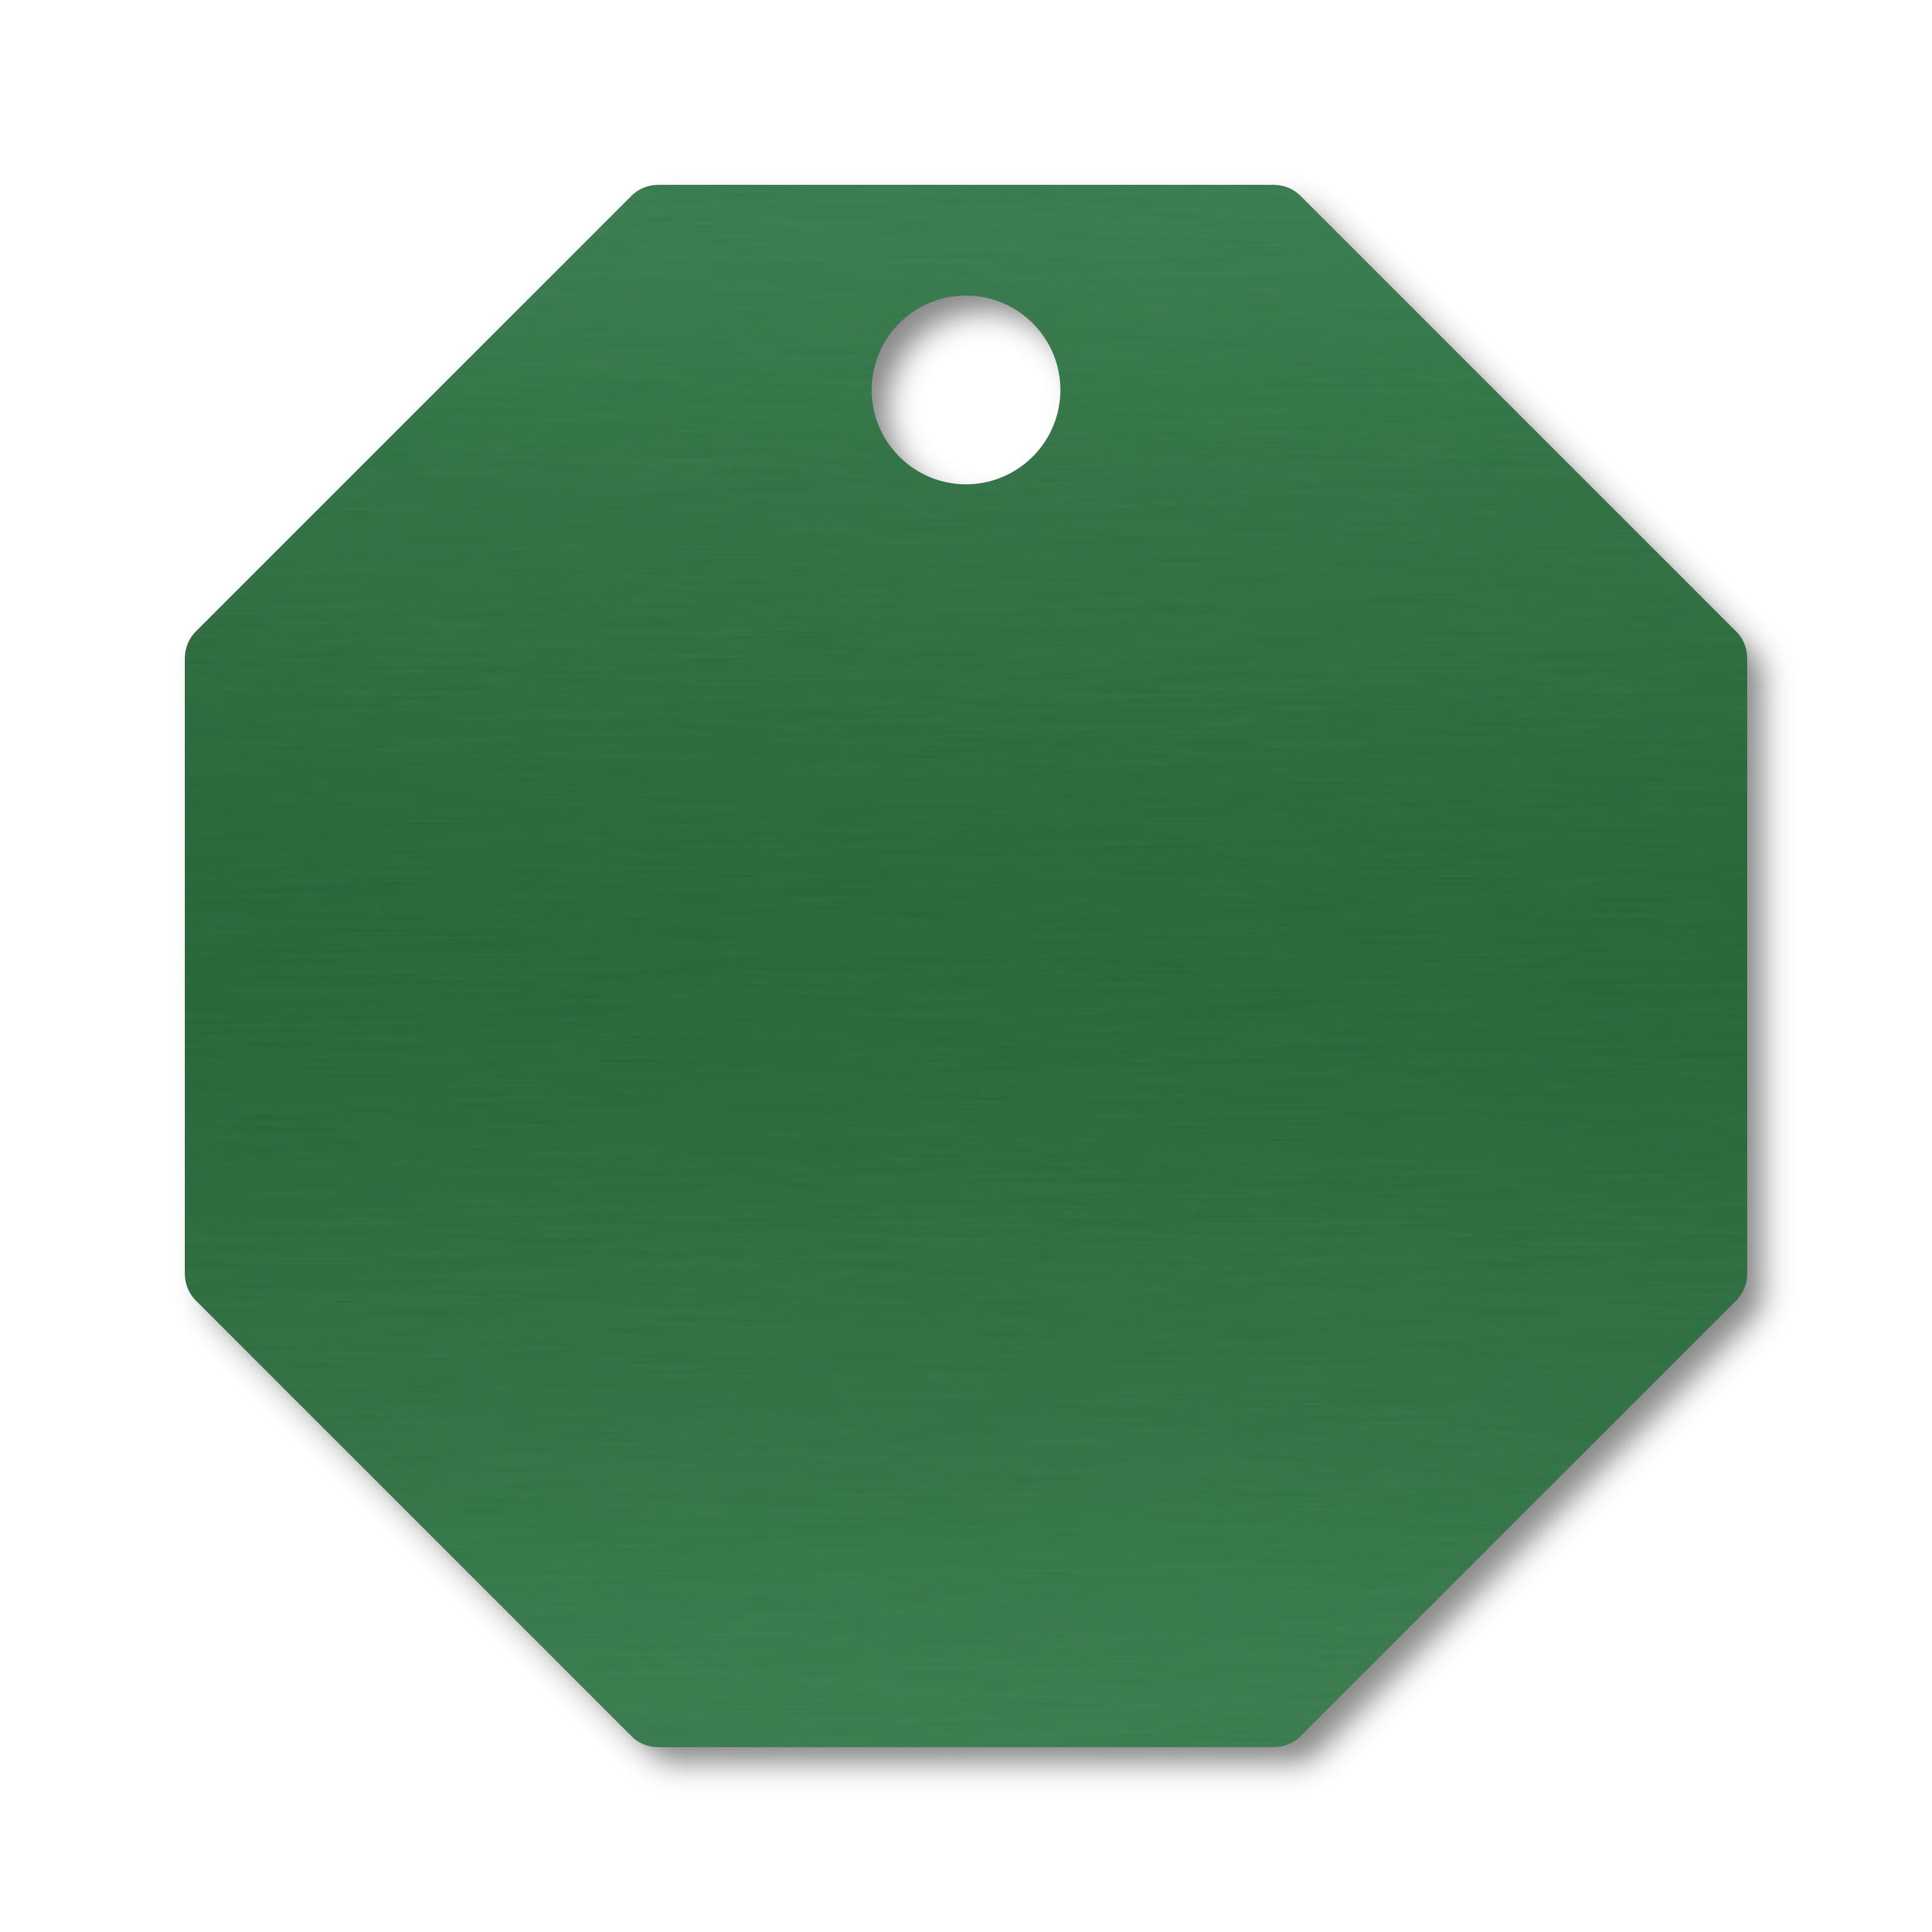 Anodized Aluminum Octagon Tags, 1-1/8" with 1/8" Hole, Laser Engraved Metal Tags Craftworks NW Green 